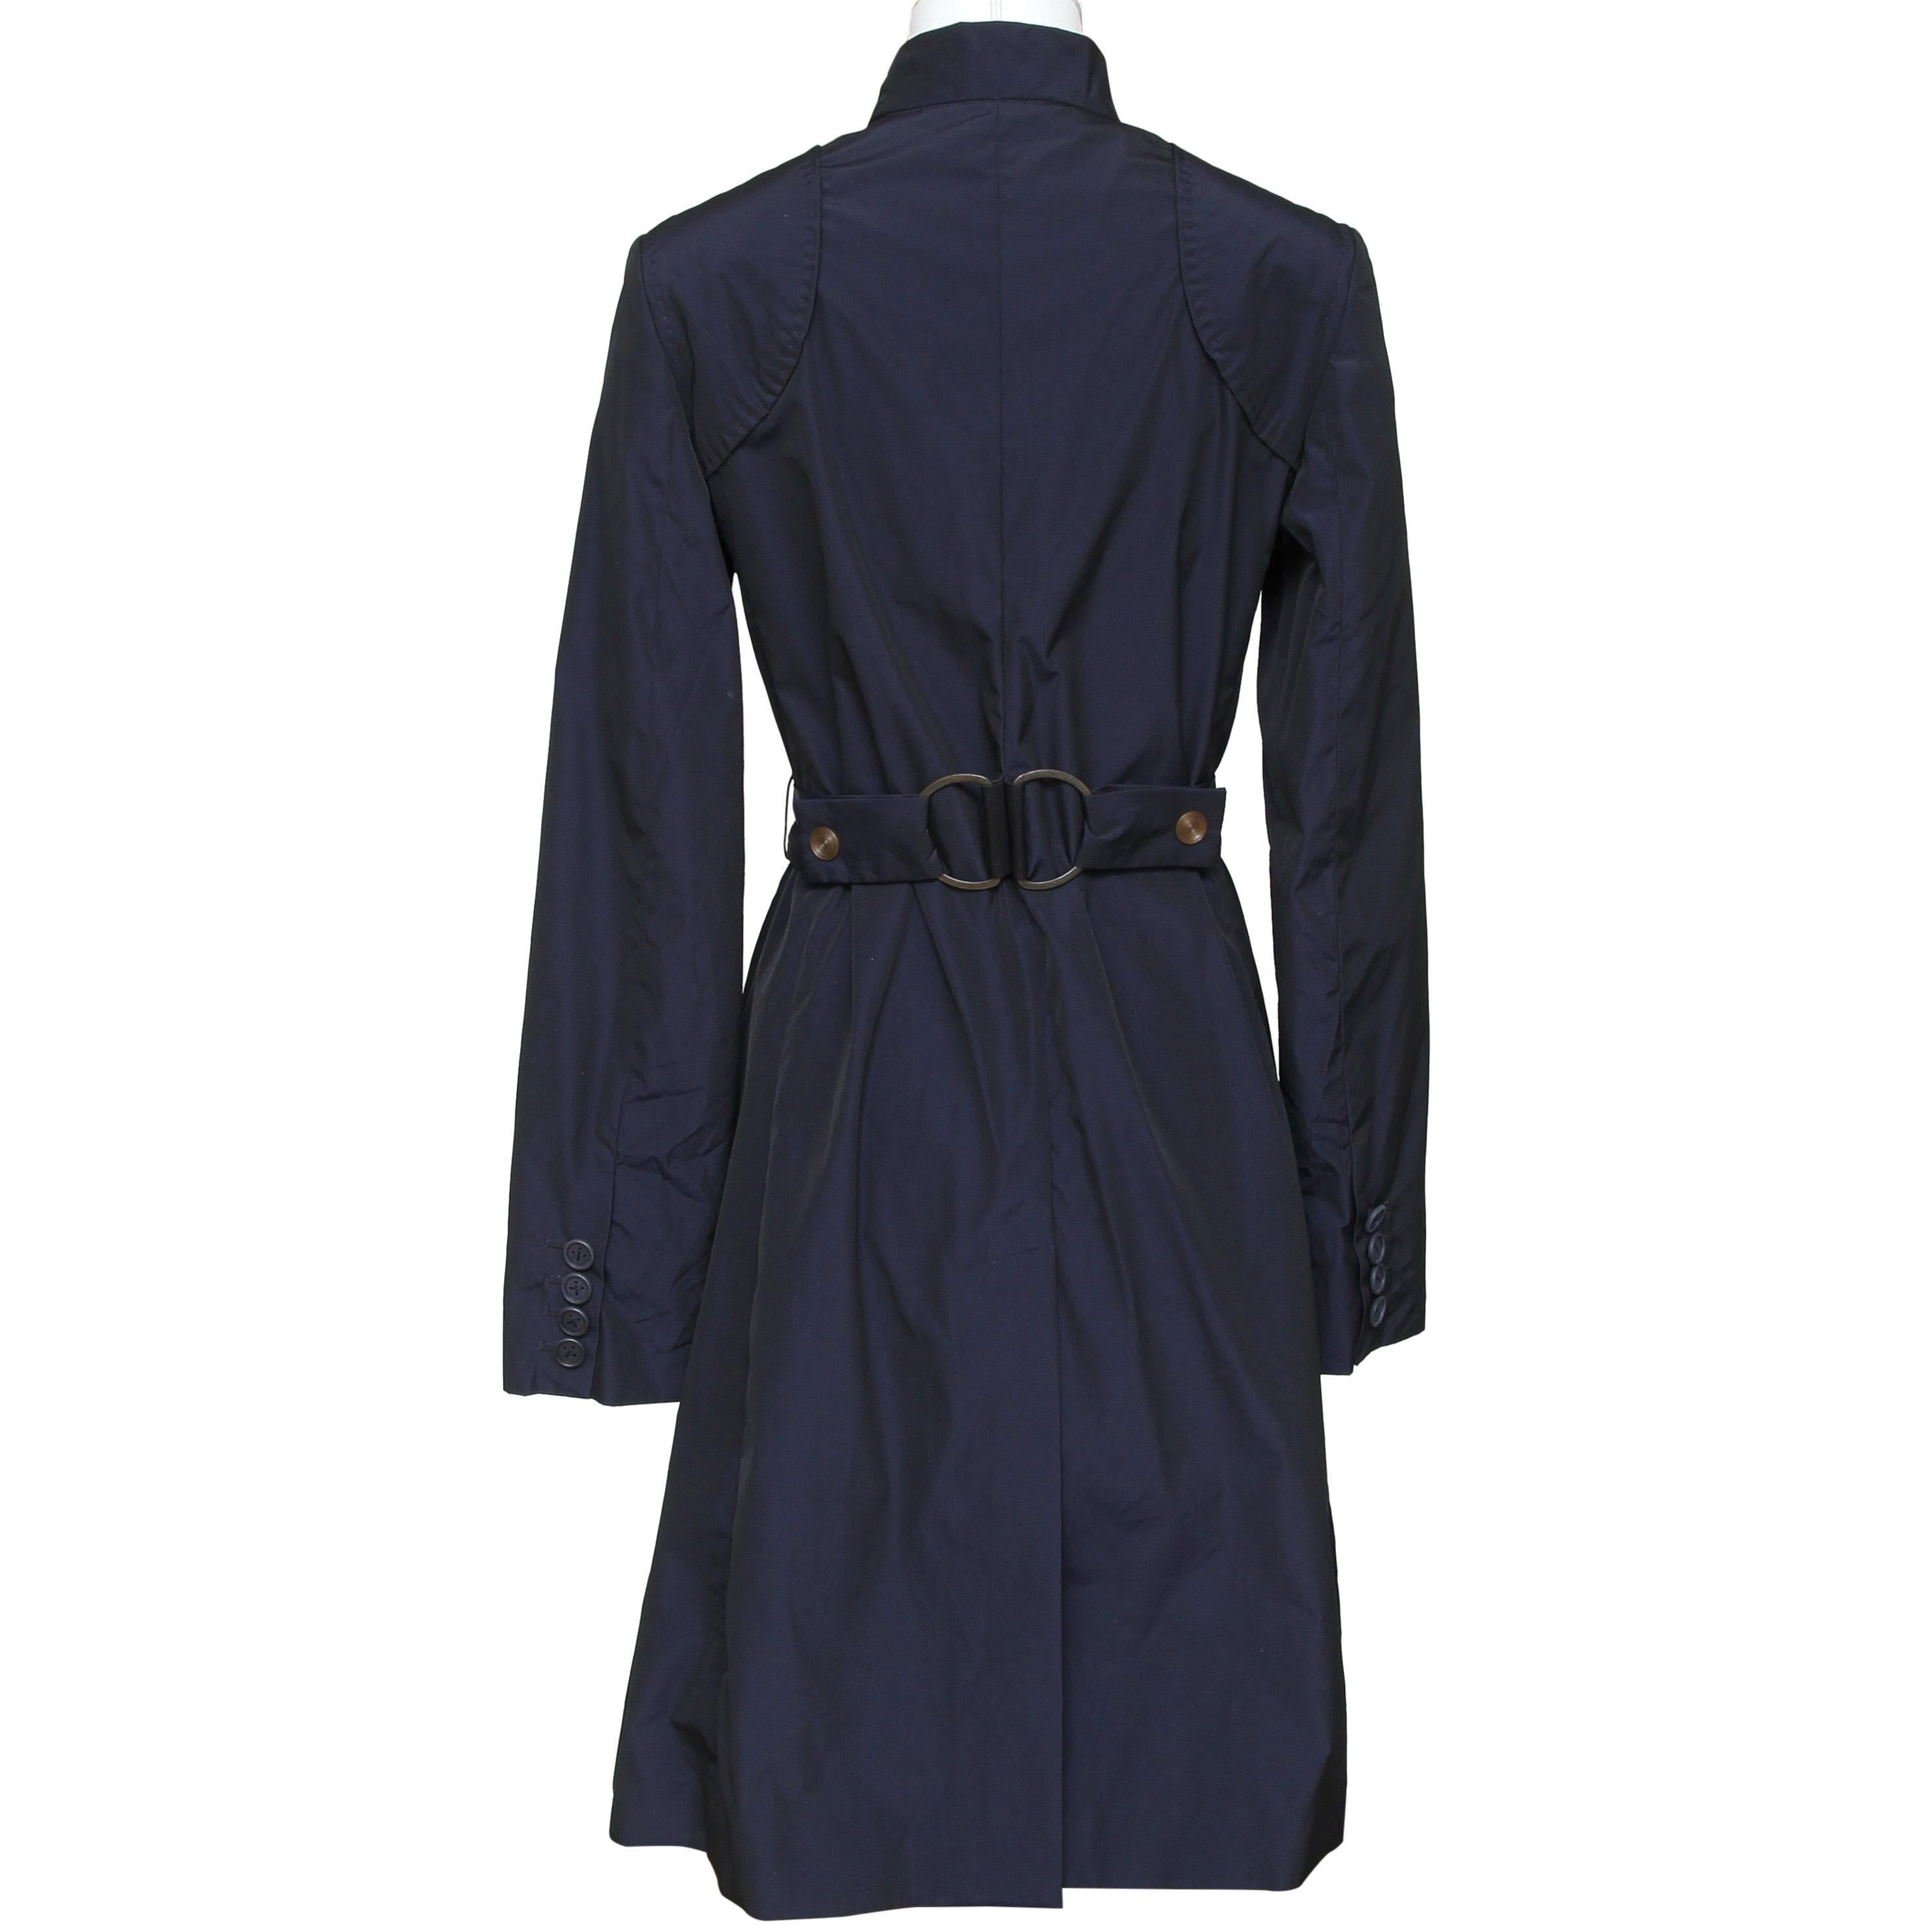 Women's or Men's STELLA MCCARTNEY Trench Coat Navy Blue Buttons Mid-Length Belt Clothing Sz 38 For Sale